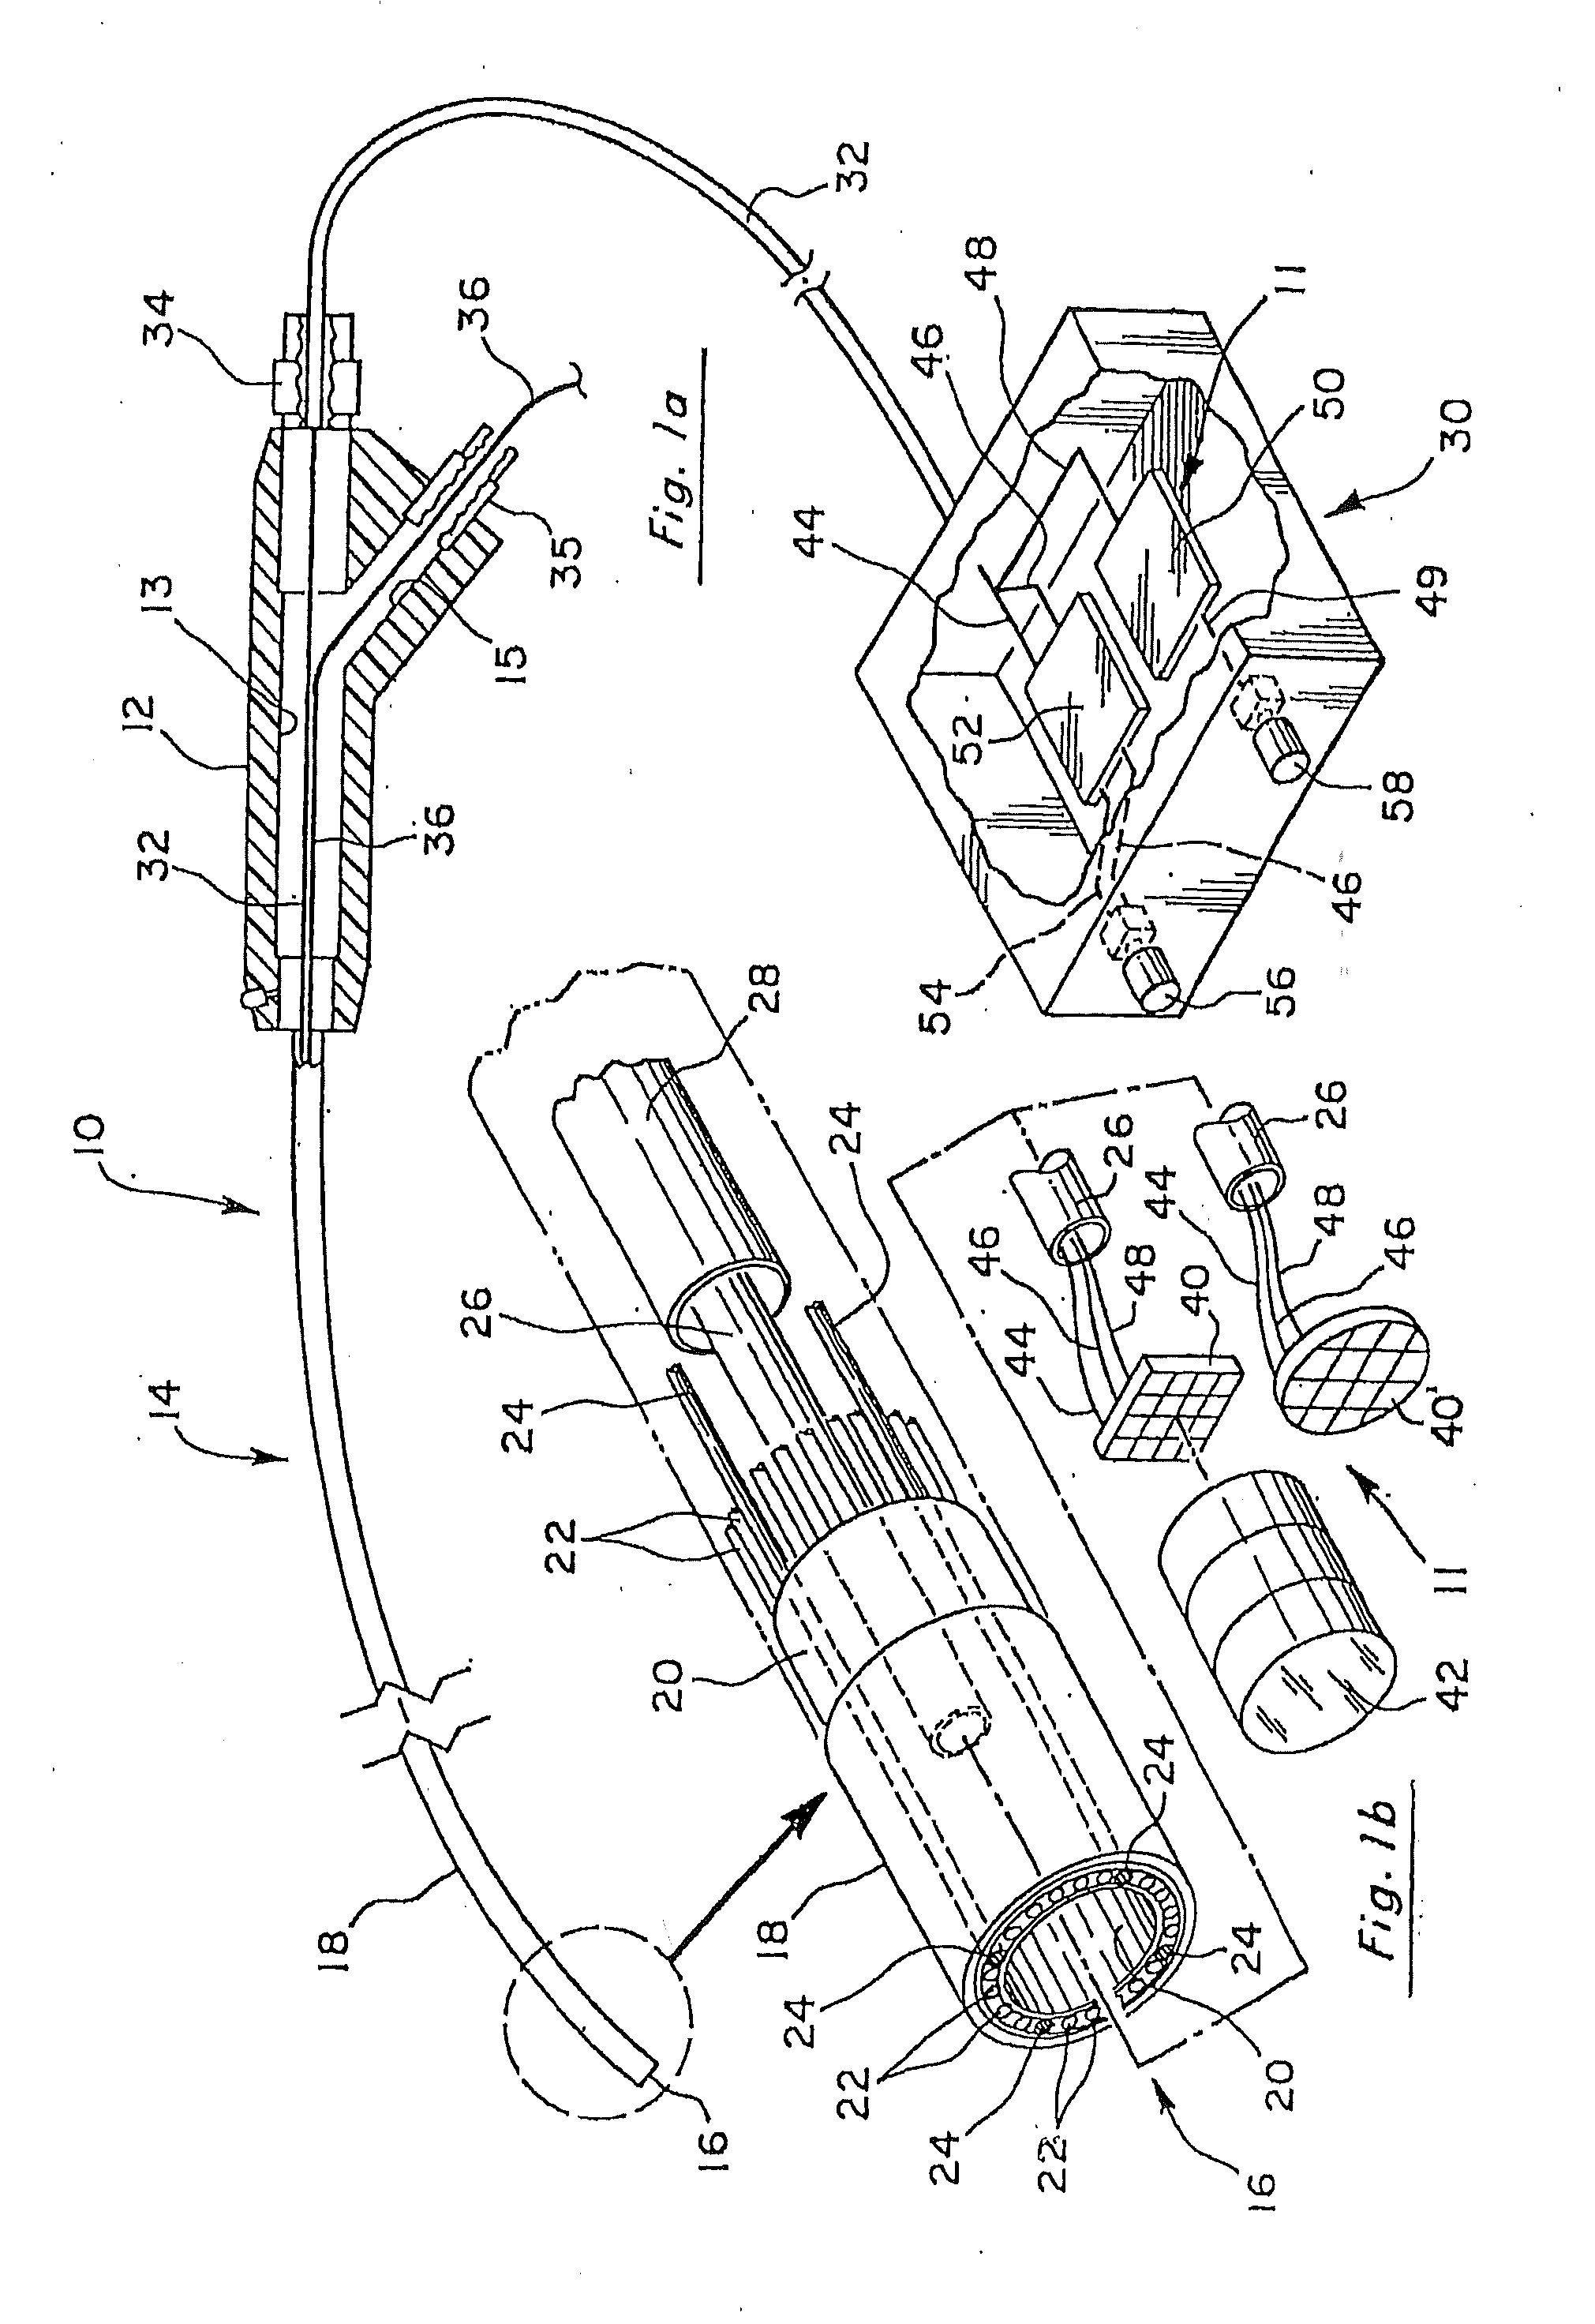 Reduced area imaging device incorporated within endoscopic devices